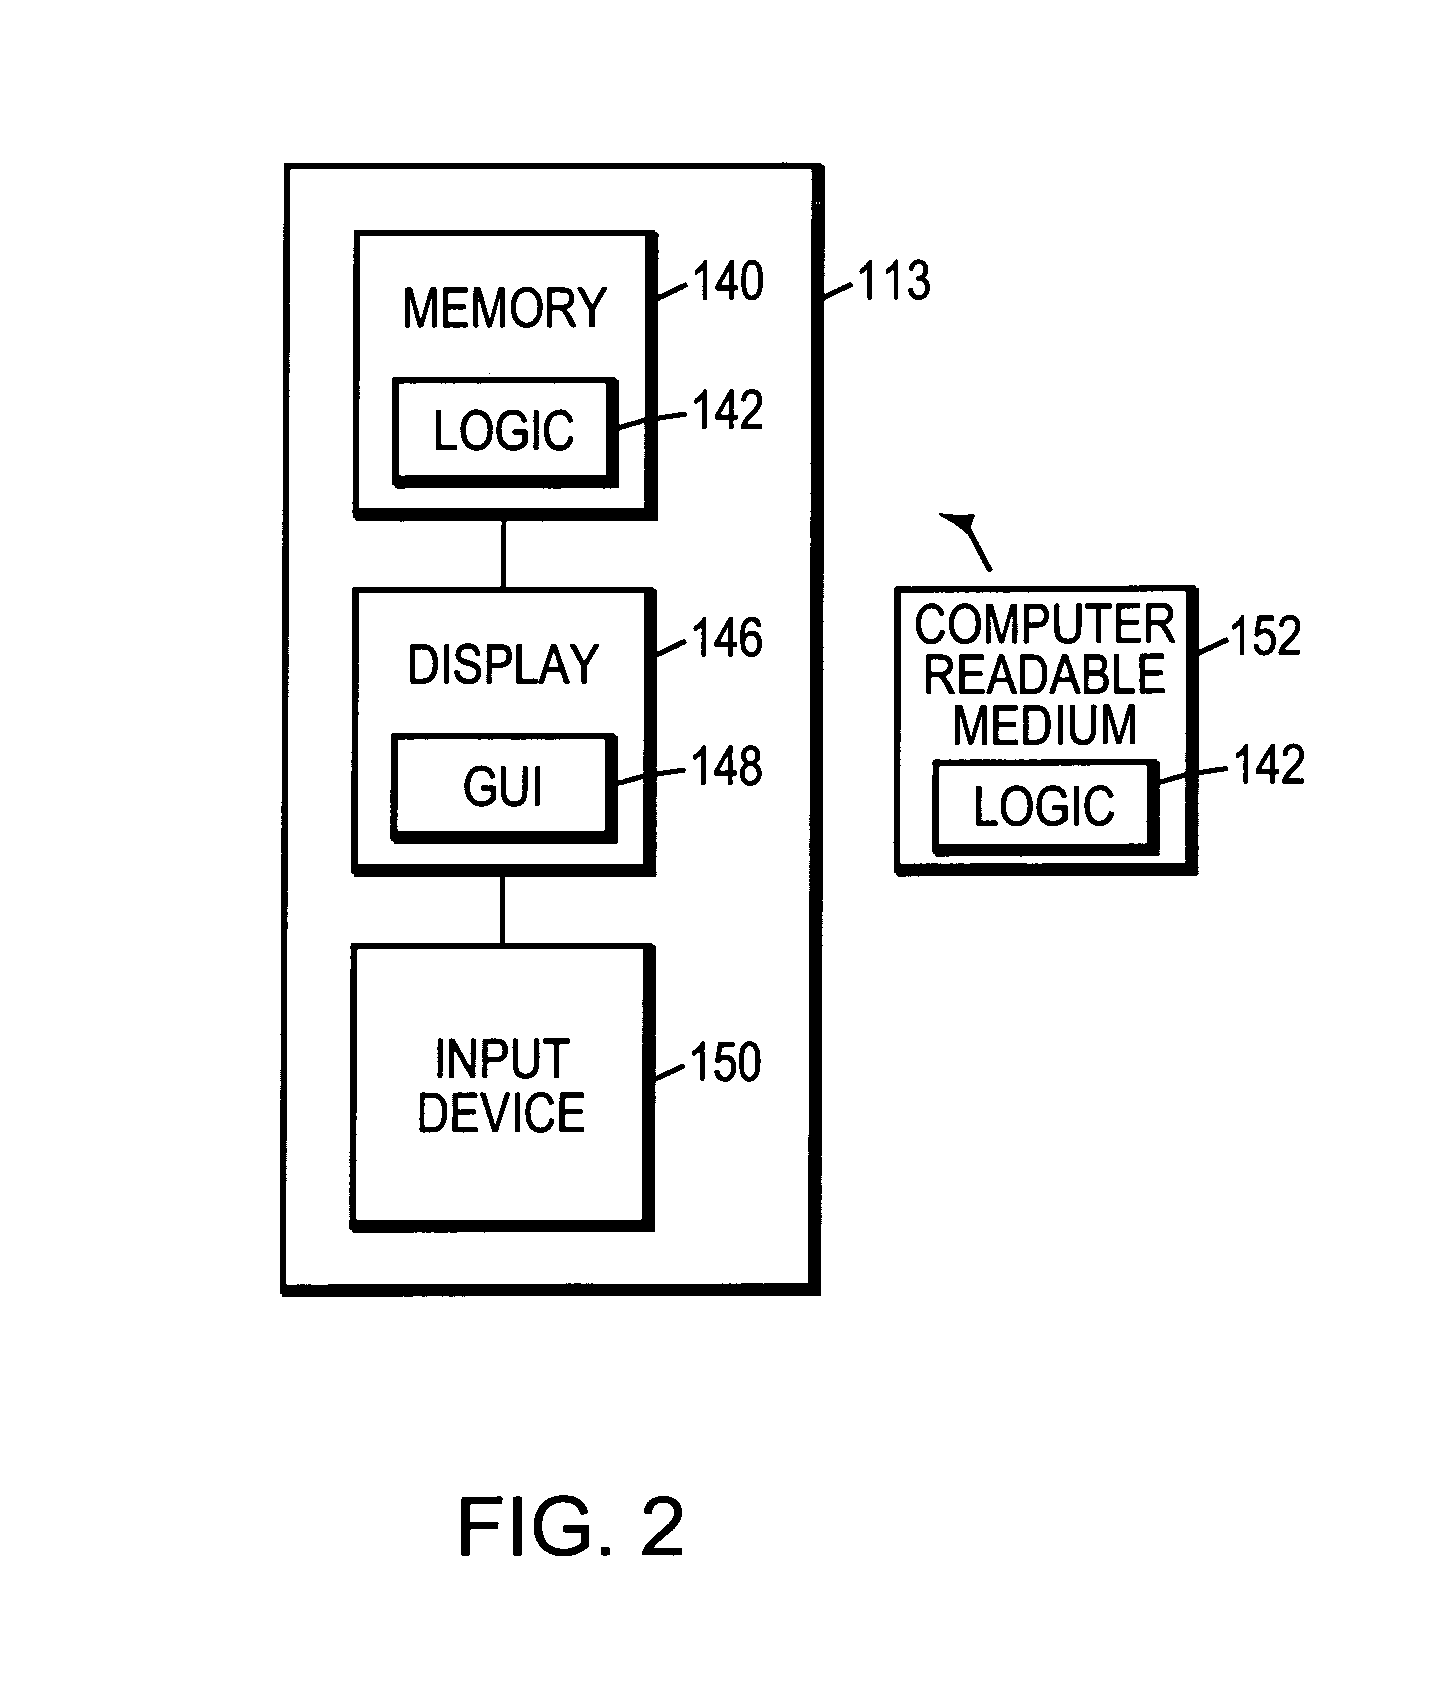 System and method for configuring data storage in accordance with workload requirements